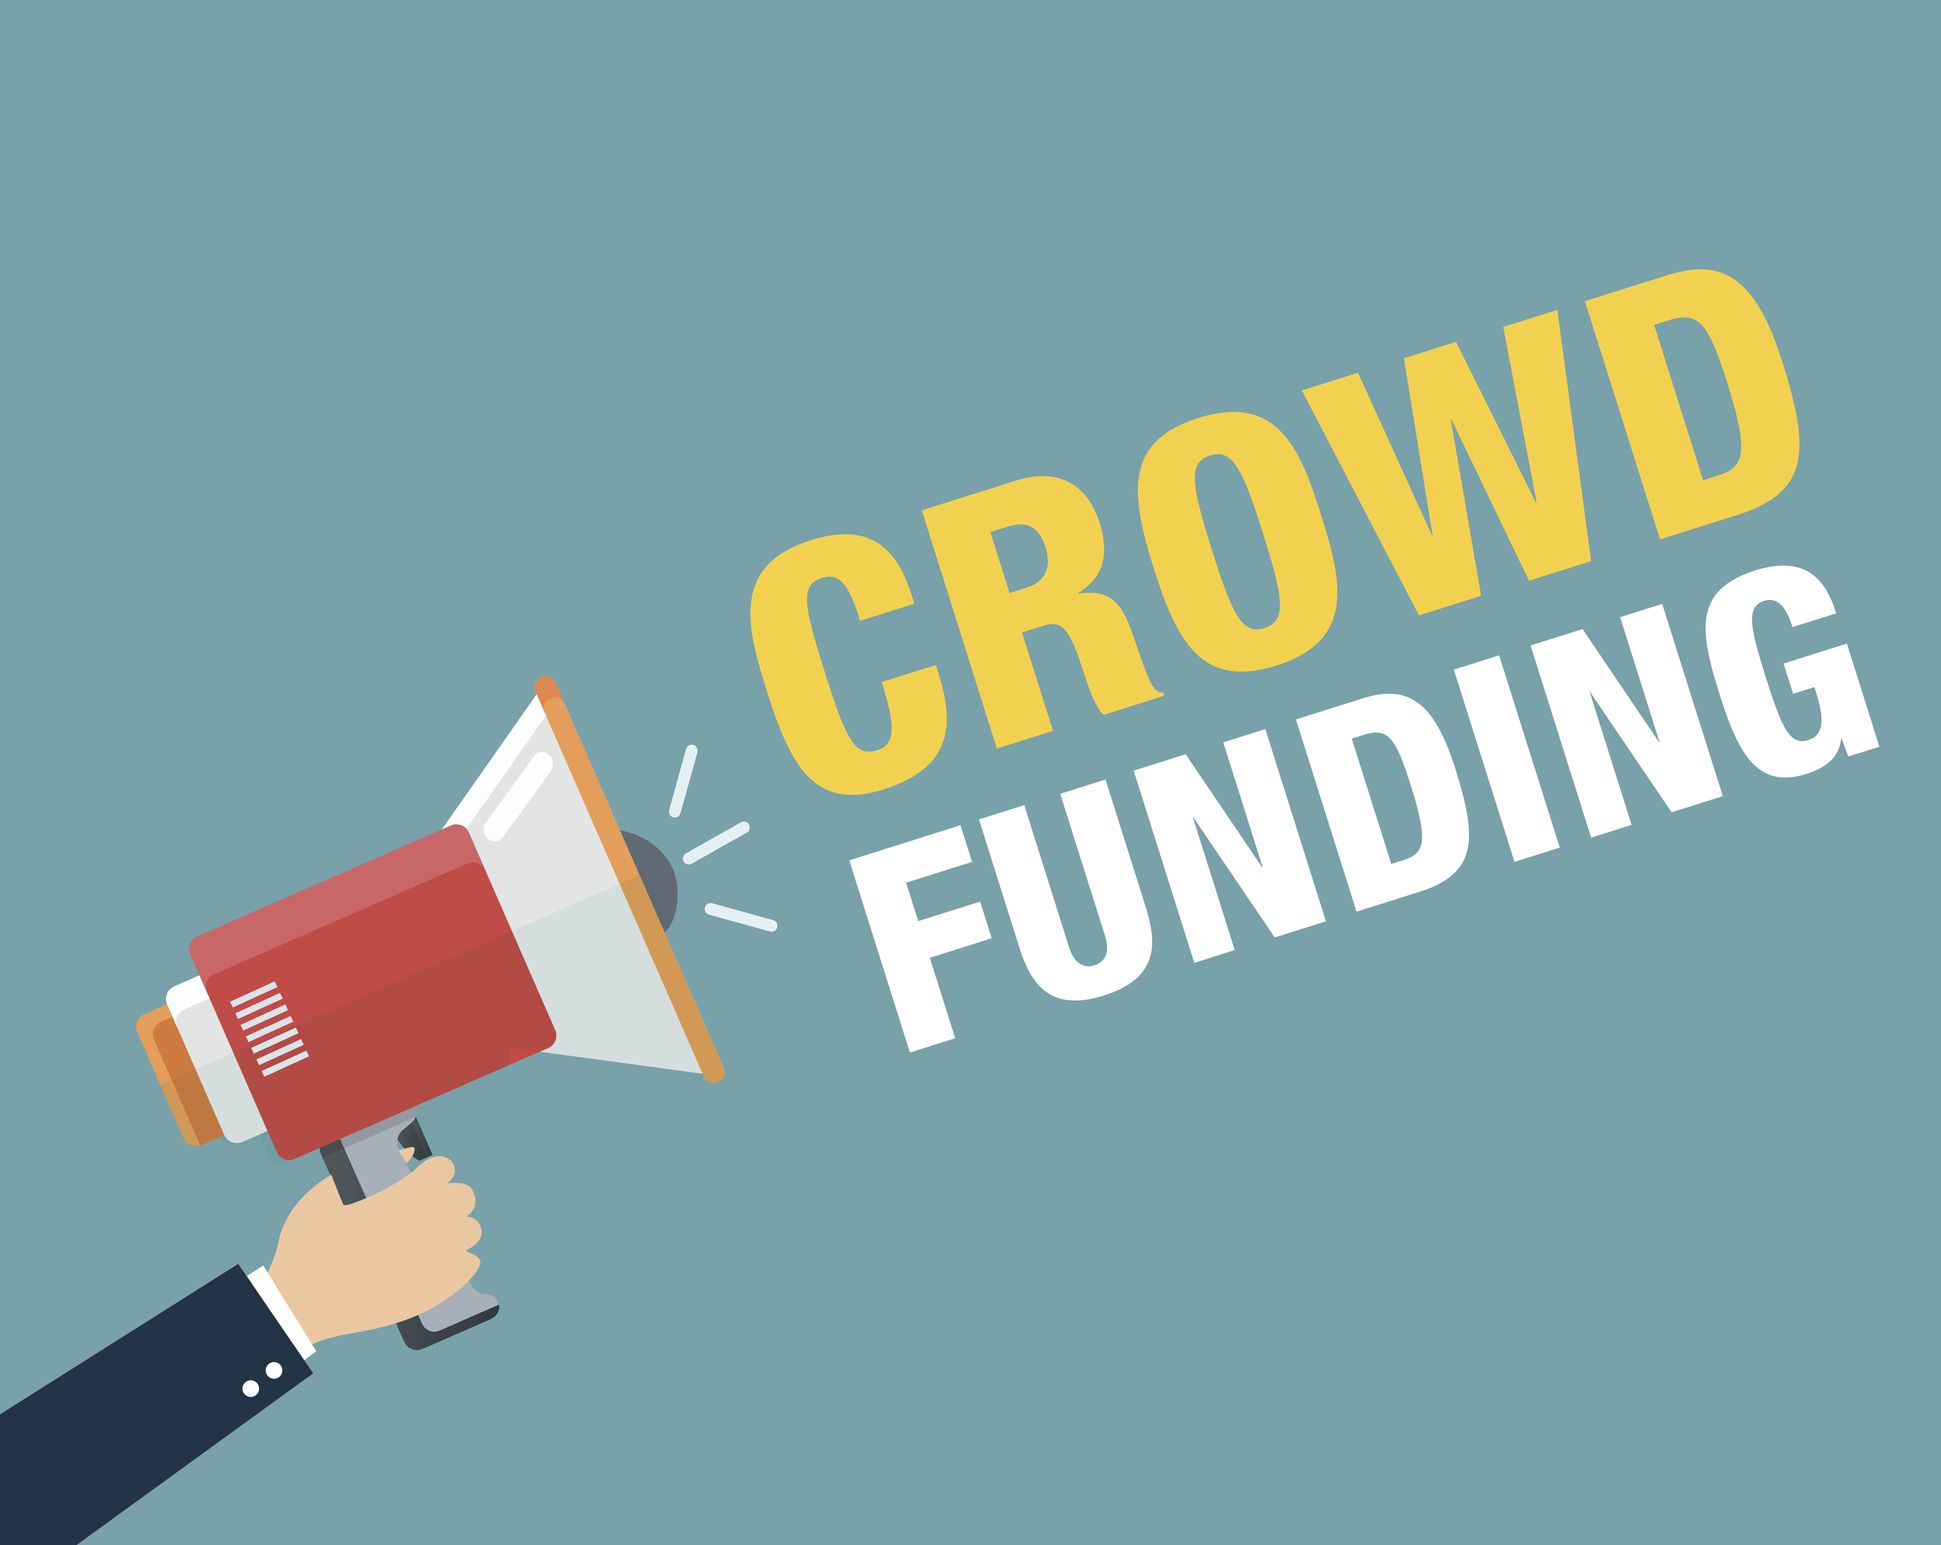 Crowdfunding is over emv software for real